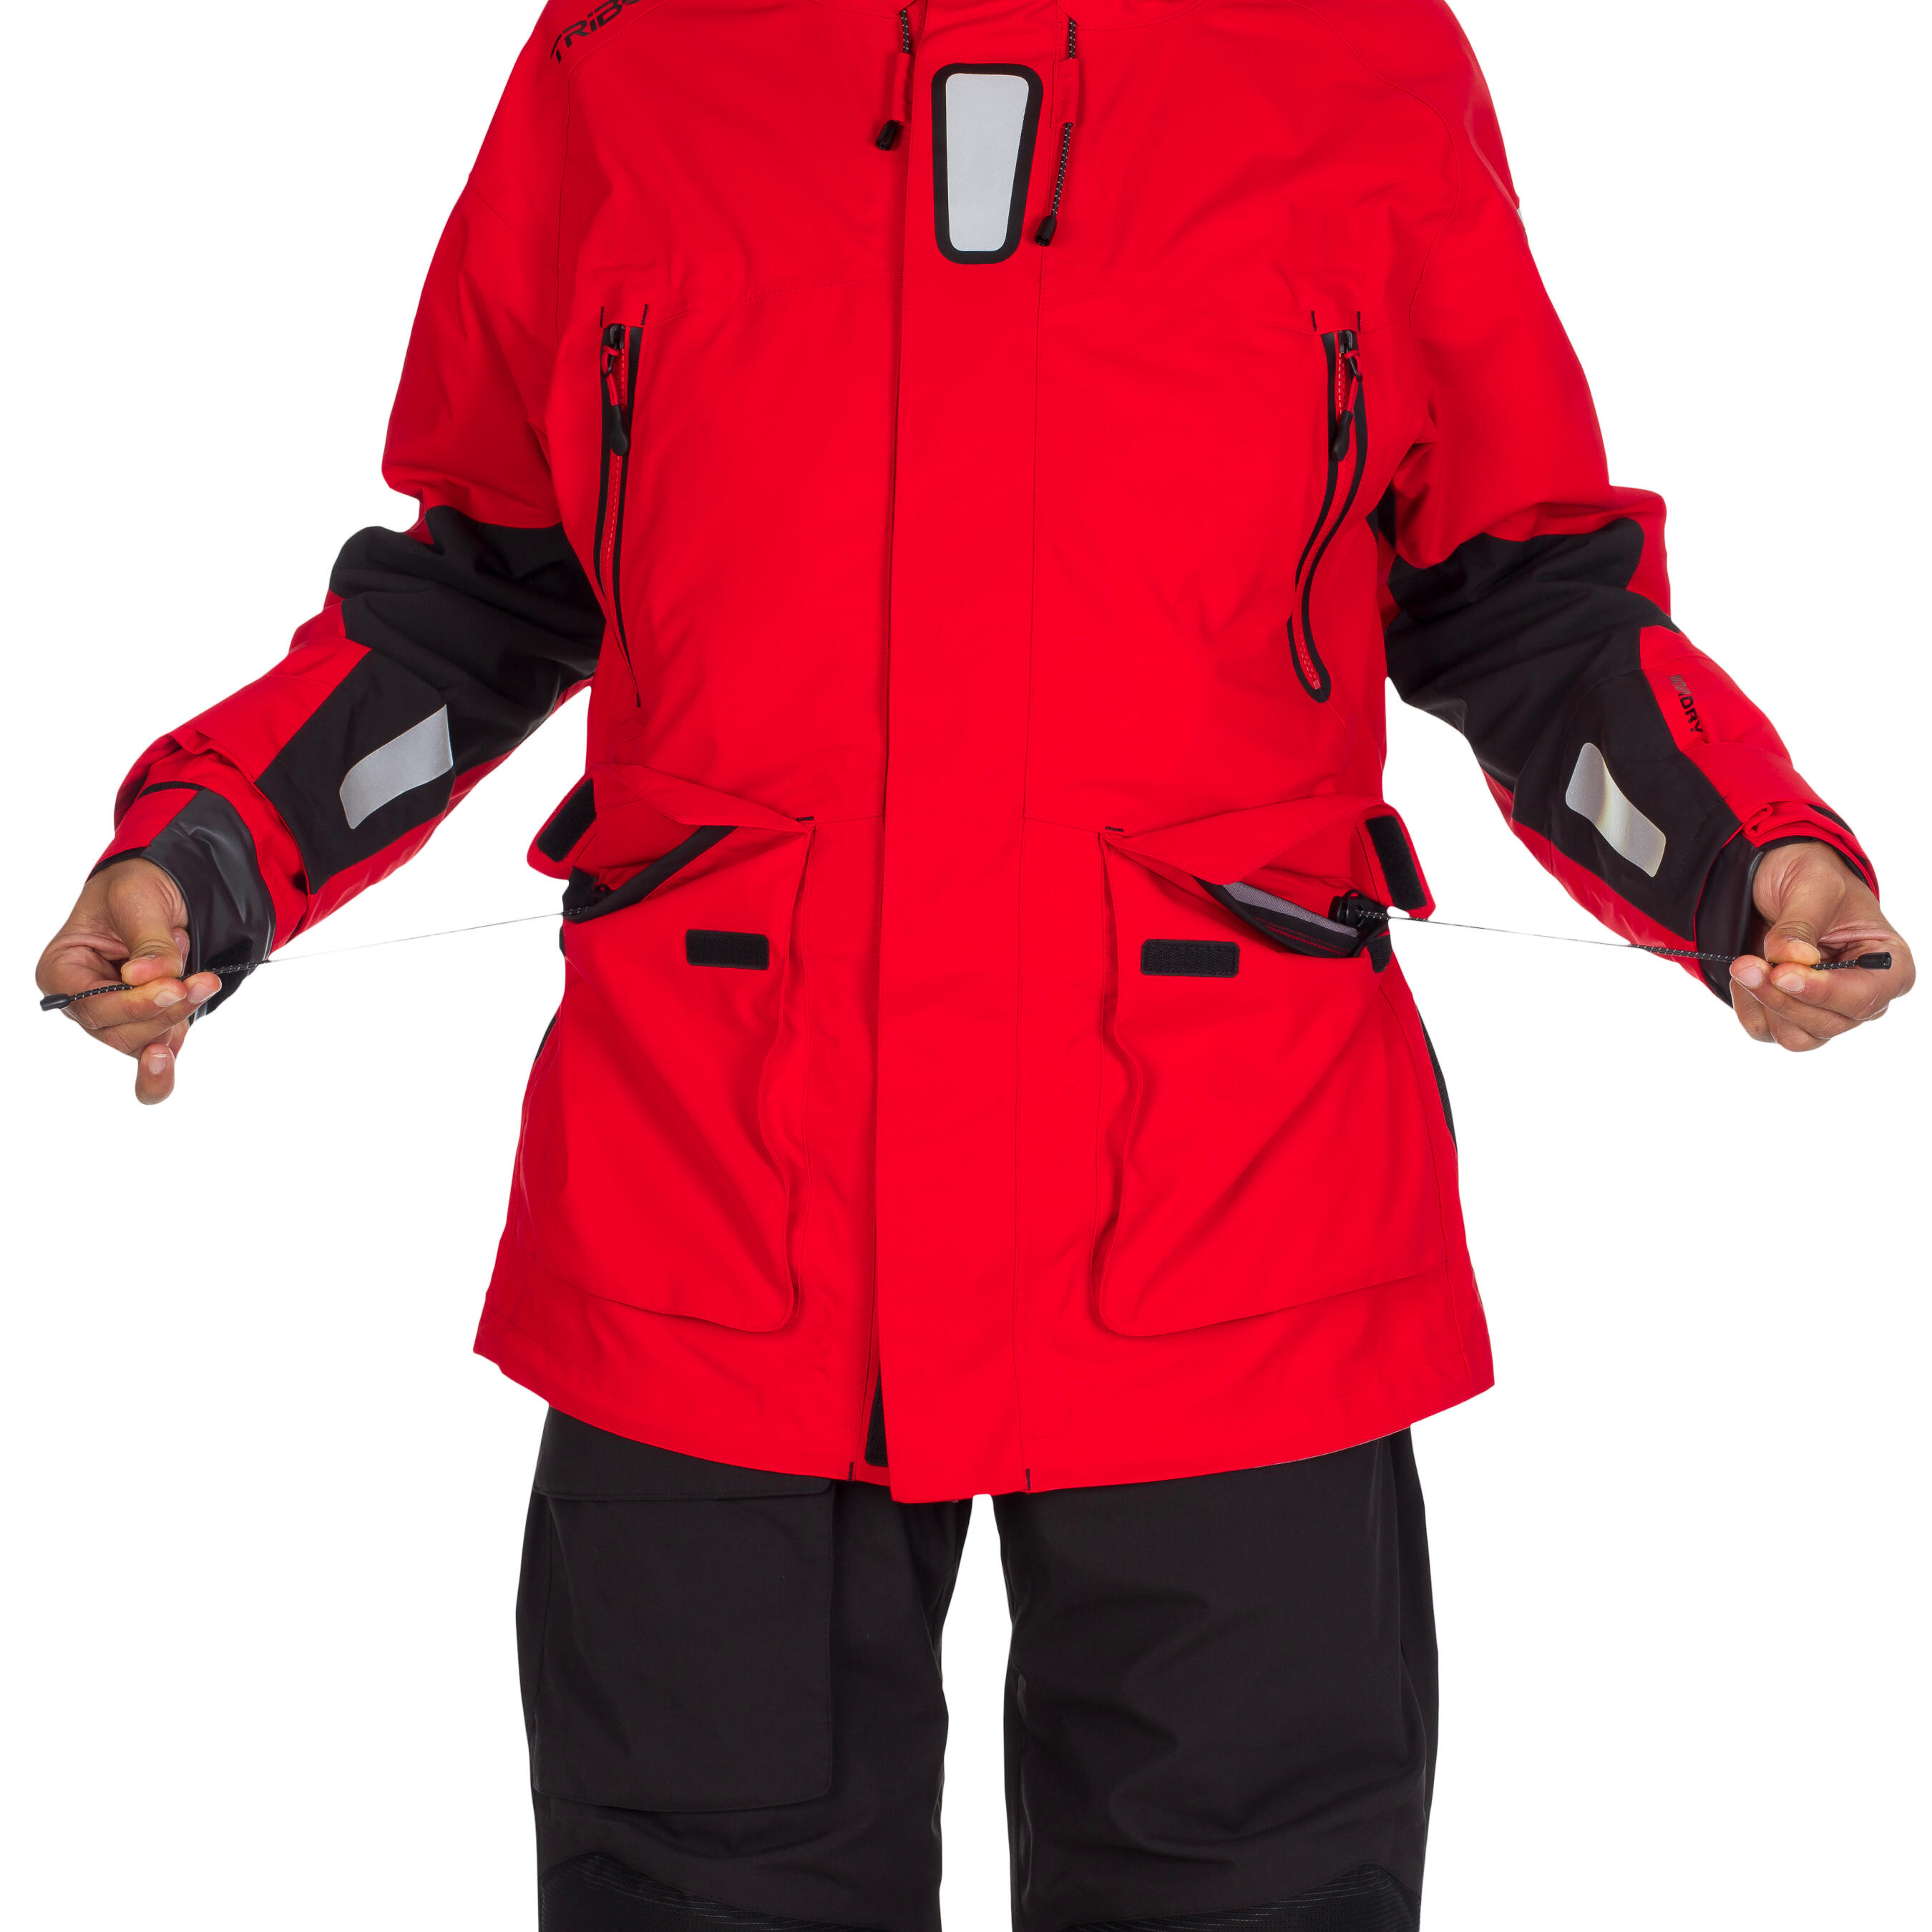 Ozean 900 Men's Waterproof and Breathable Sailing Jacket - Red 20/44